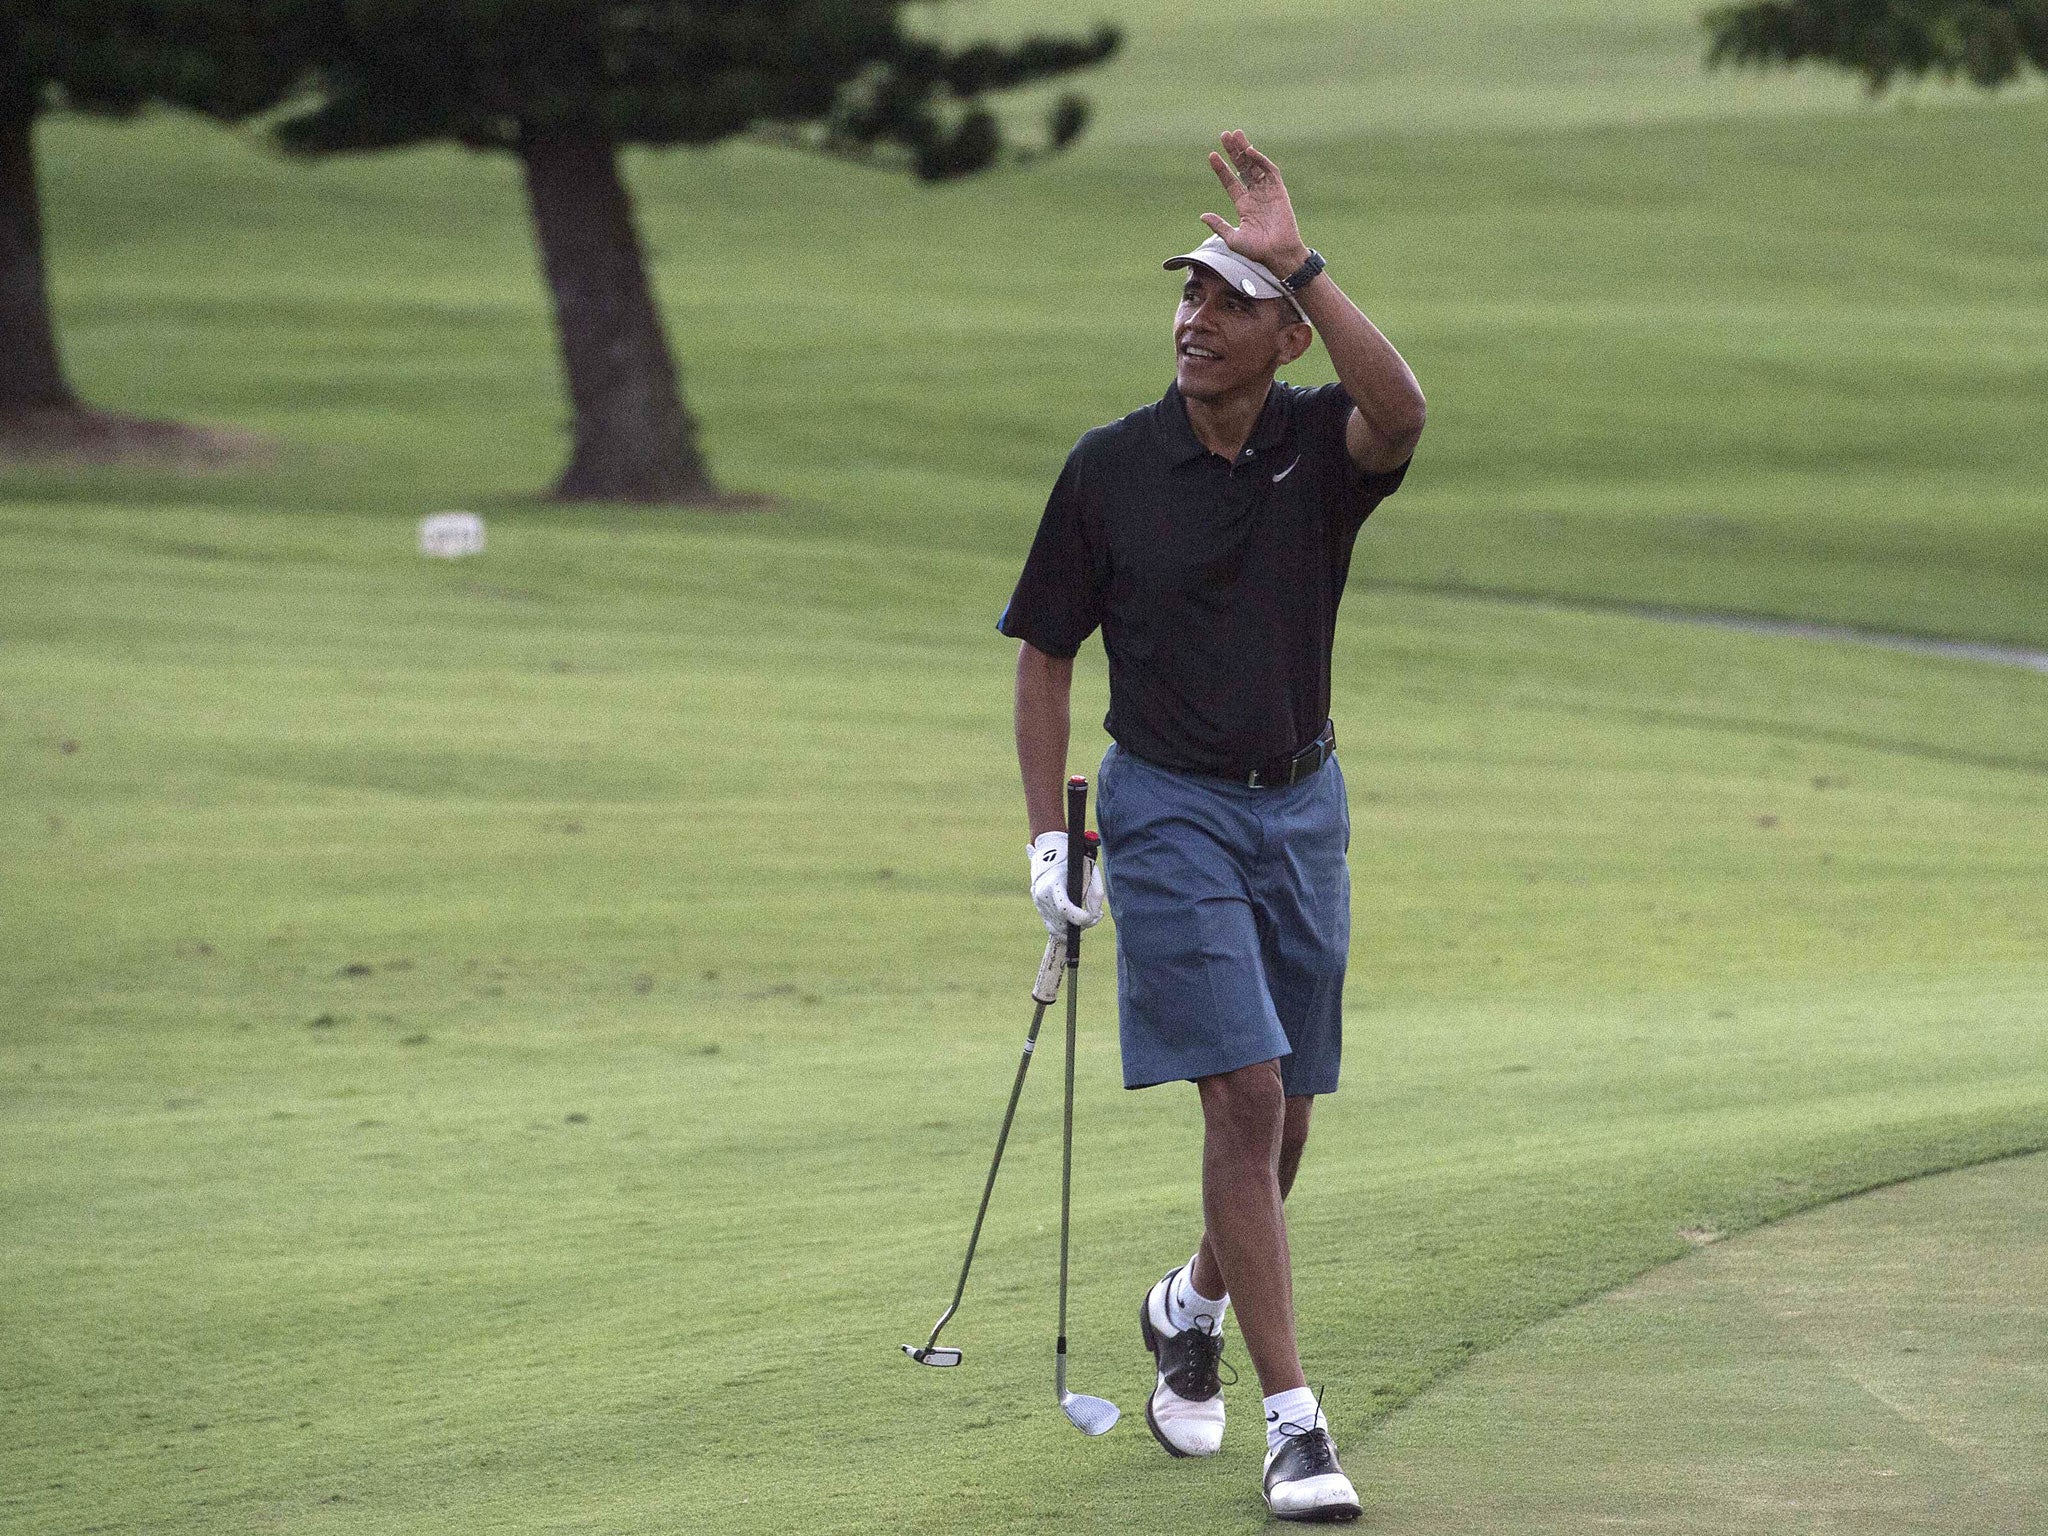 Obama waves to onlookers as he plays golf at the Mid-Pacific Country Club in Kailua on 30 December, 2014